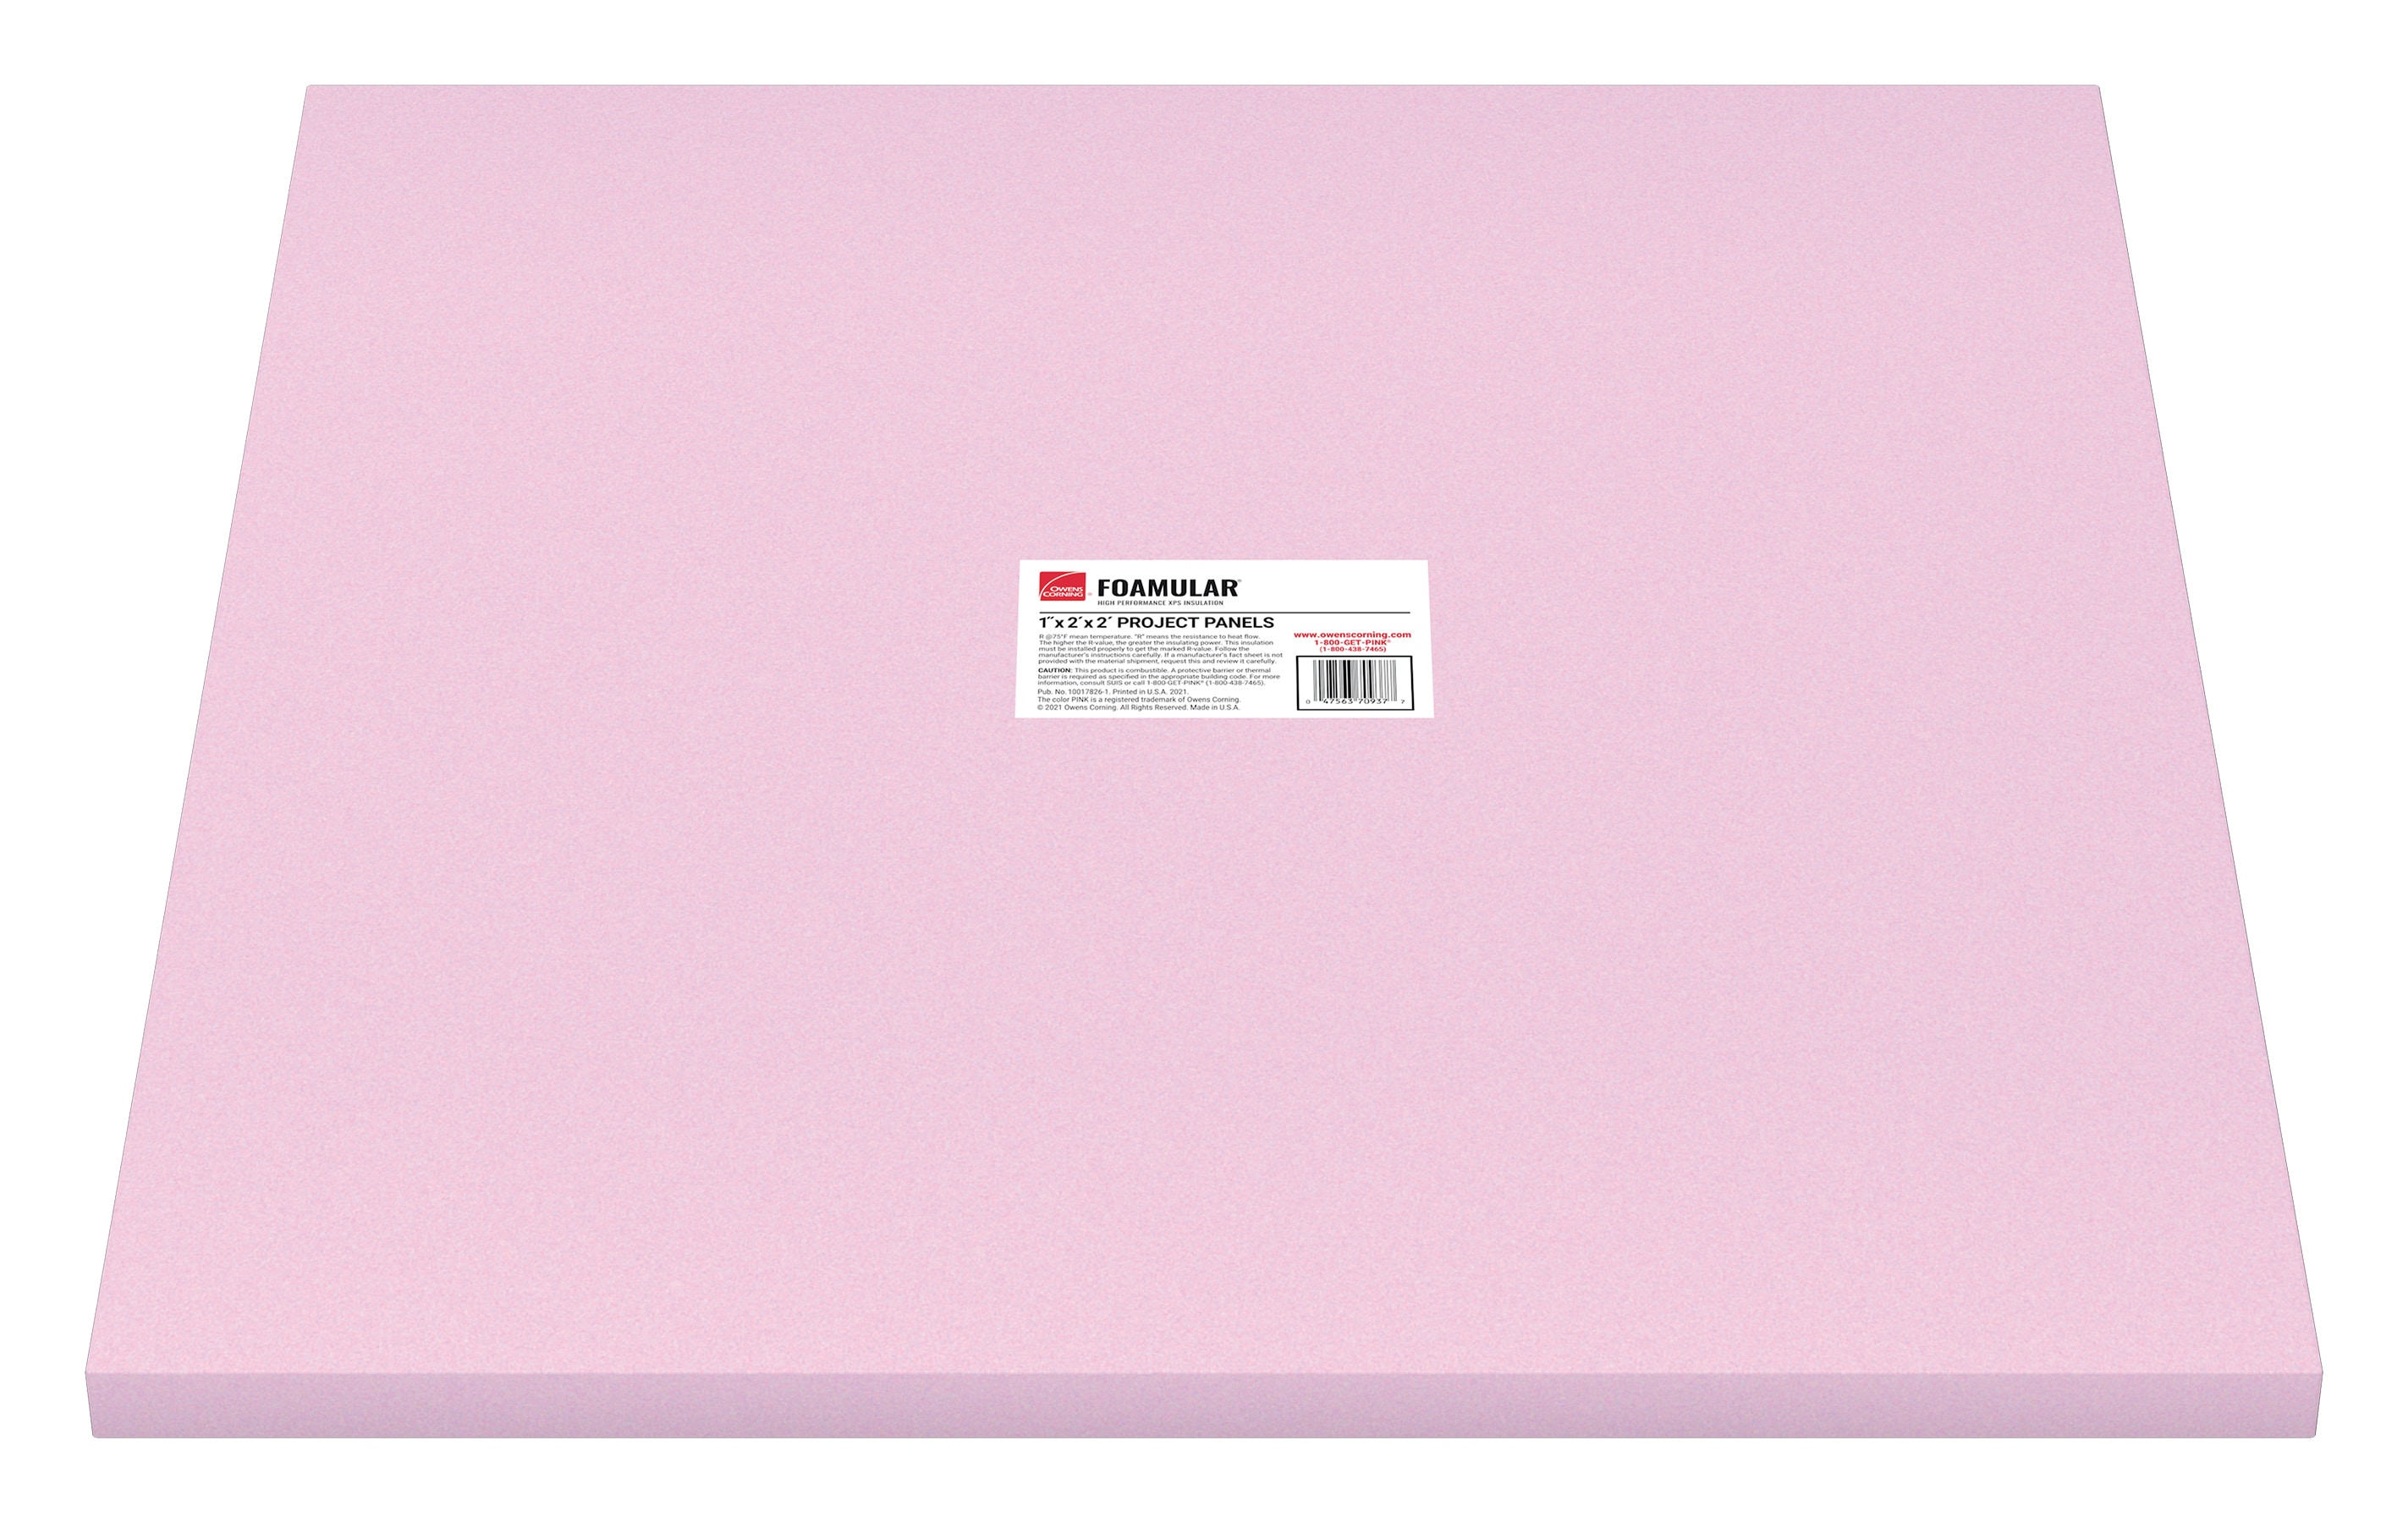 Owens Corning R-5, 1-in x 2-ft x 2-ft FOAMULAR Unfaced Foam Board  Insulation in the Board Insulation department at